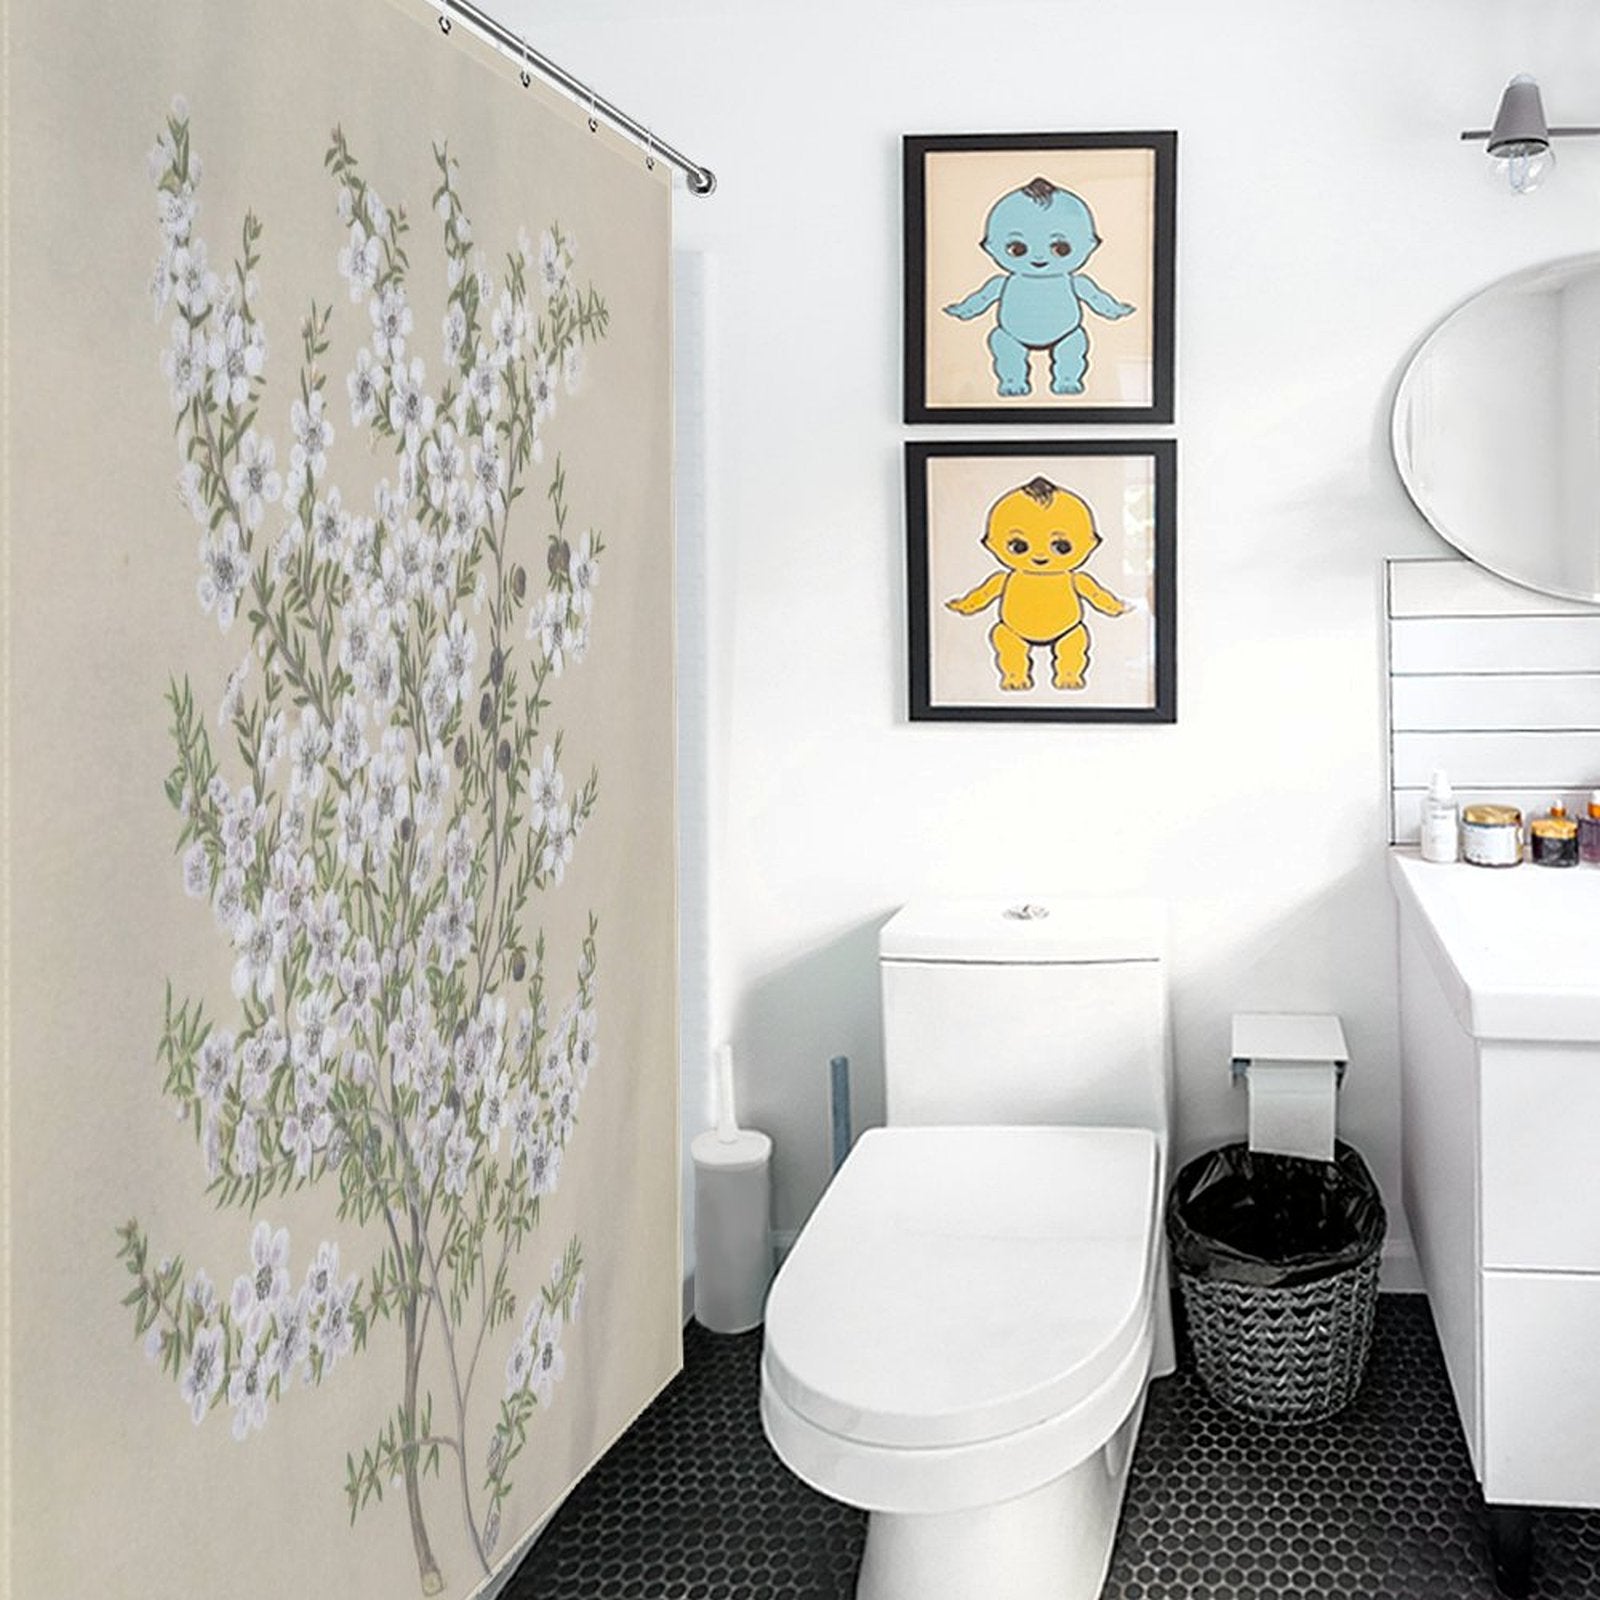 A nature-themed bathroom featuring a toilet, a vanity with a sink, a round mirror, and framed artwork of blue and yellow cartoon characters hanging on the wall. The Retro Green Flower Shower Curtain-Cottoncat by Cotton Cat adds a nostalgic touch to this cozy space.